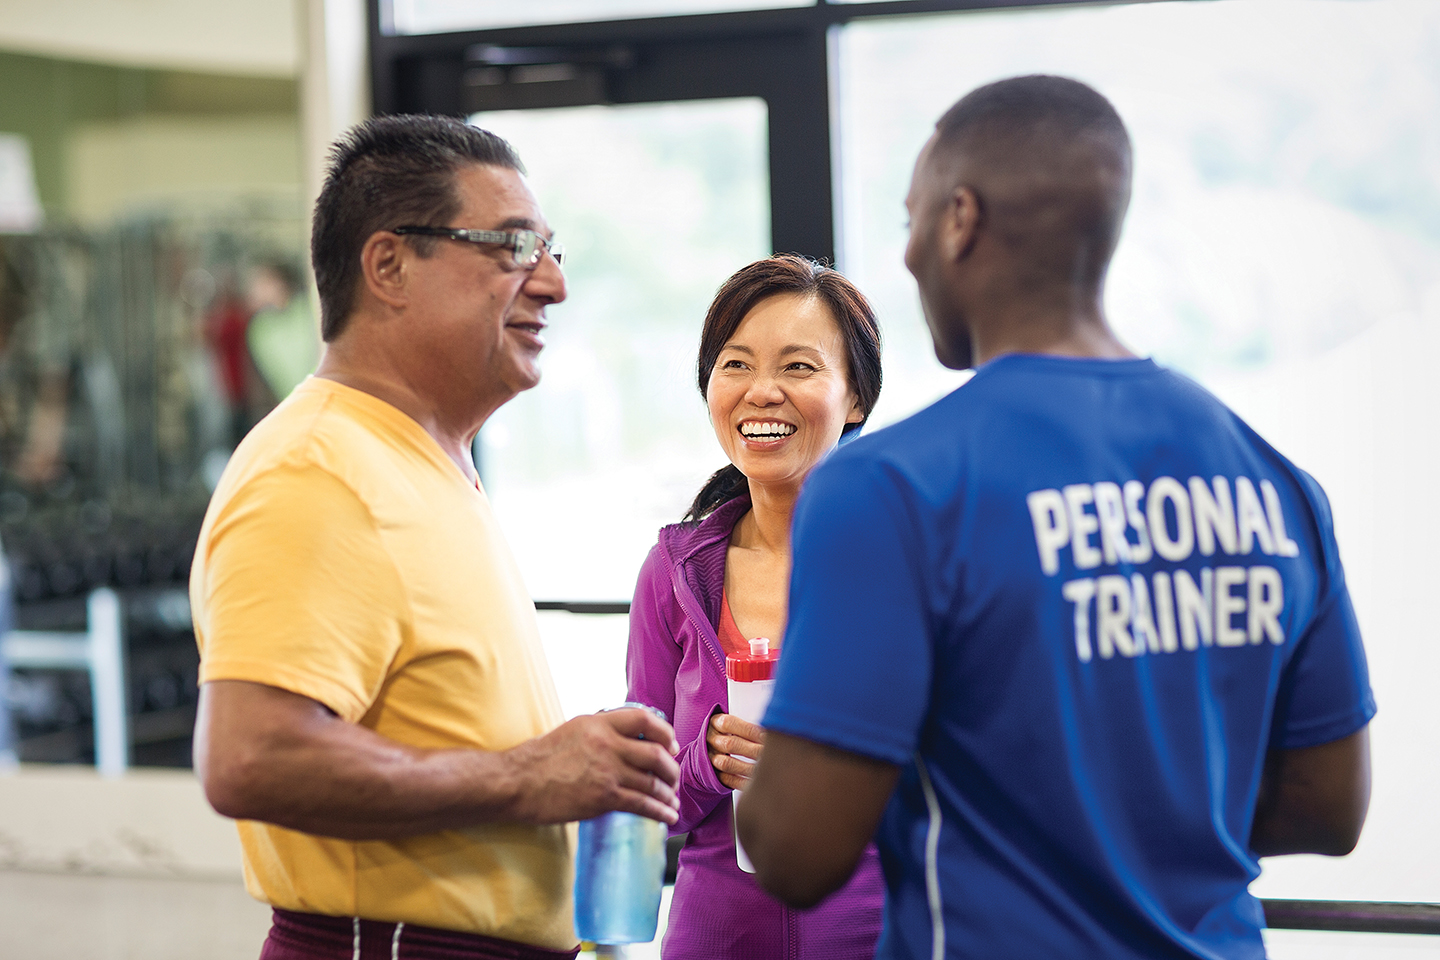 Personal Training - YMCA of Central Florida